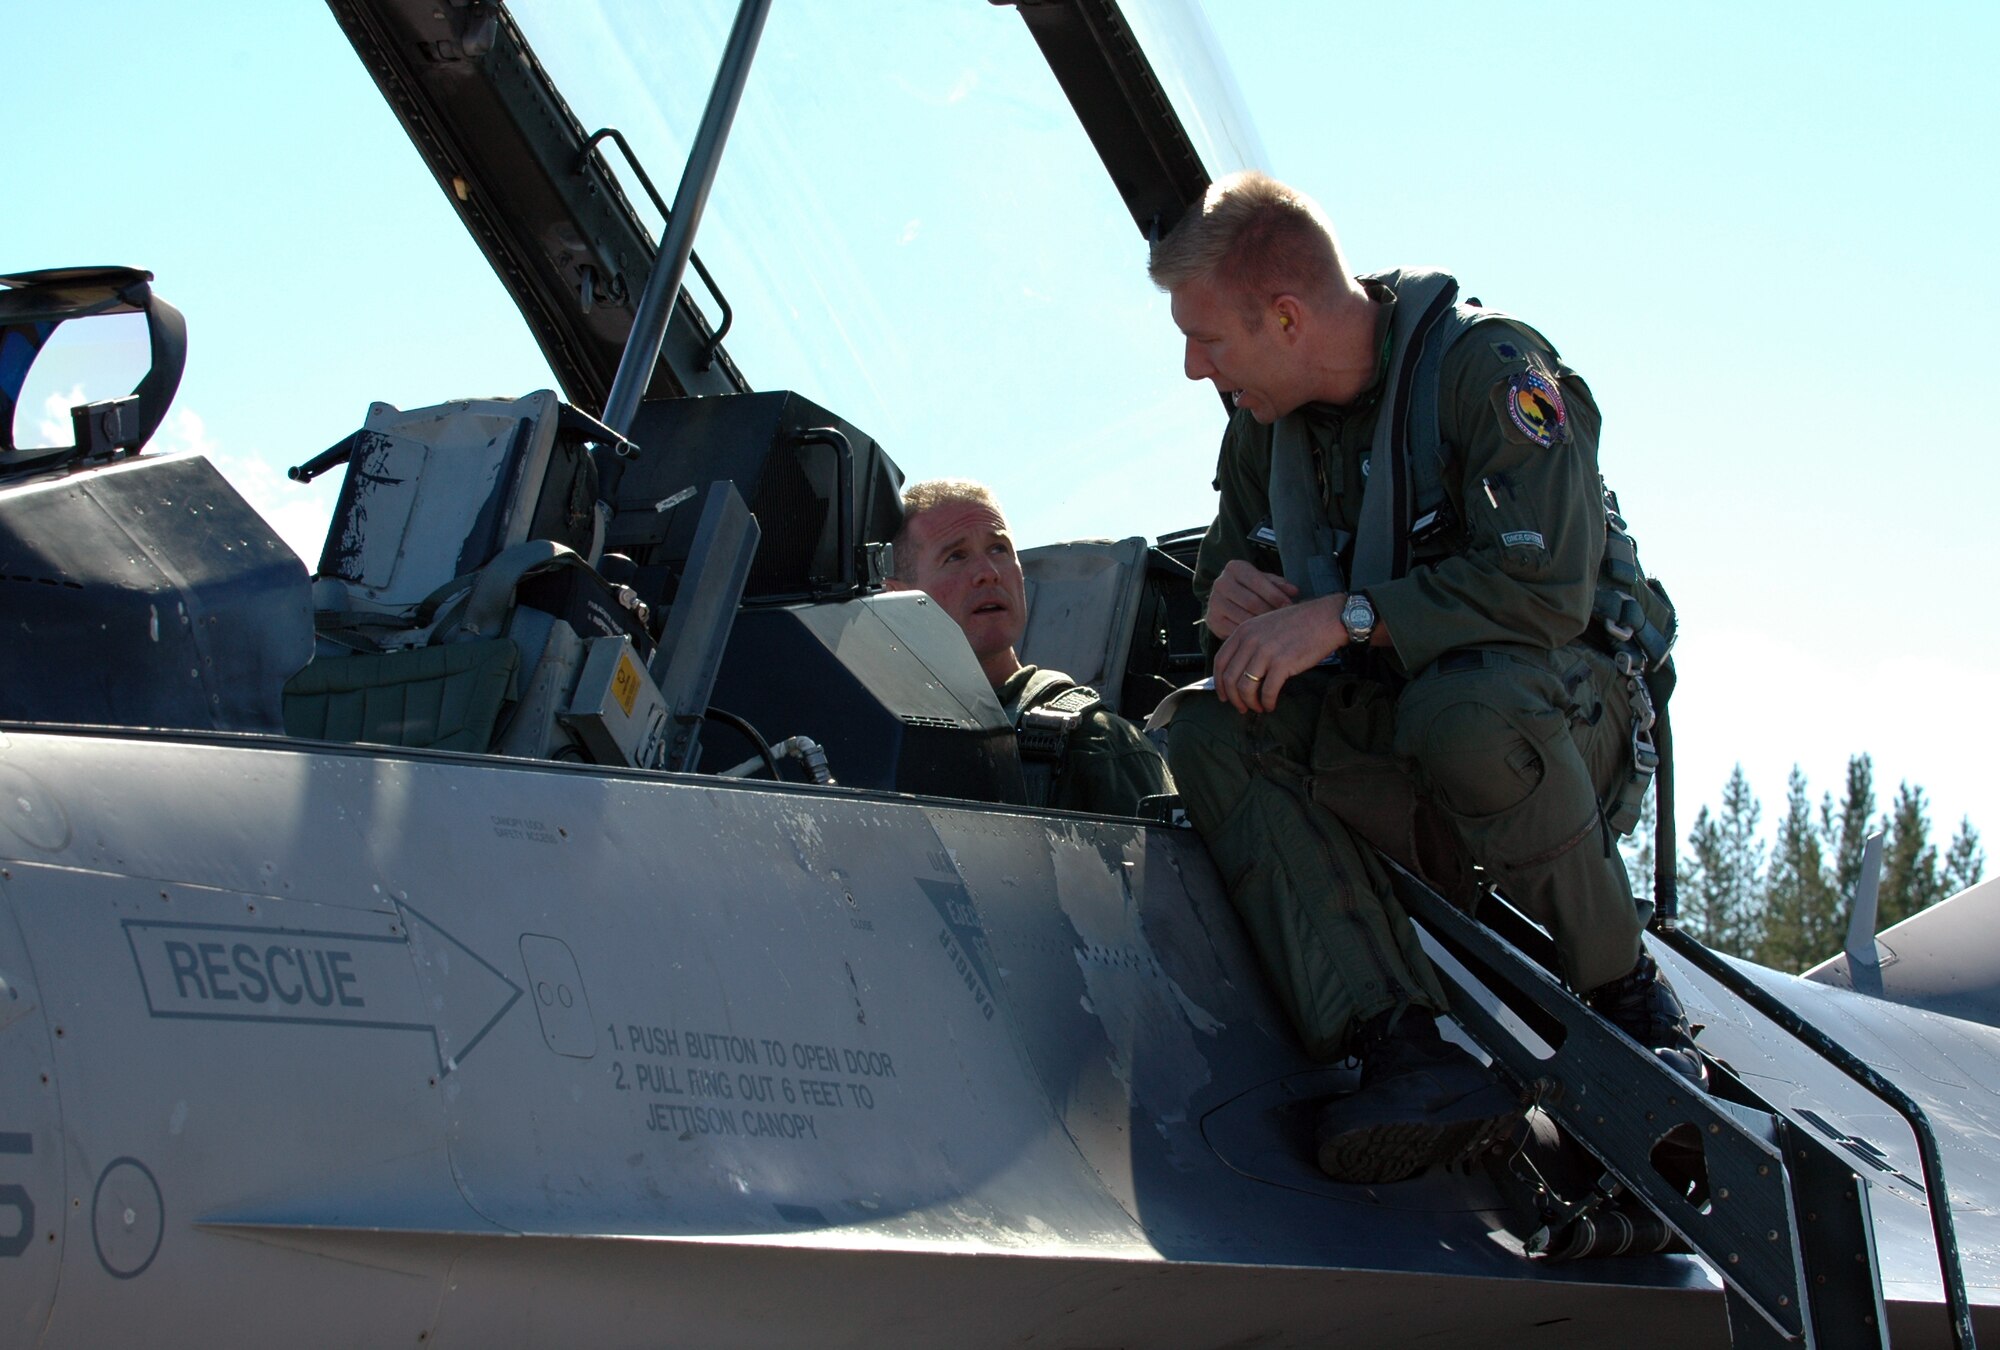 Lt. Col. Karl Ingeman, 555th Fighter Squadron commander, goes over some in-flight safety rules with Master Sgt. Christopher Sawaryn, 31st Aircraft Maintenance Squadron first sergeant, before a familiarization flight Aug. 5, 2010 at Kallax Air Base, Sweden.The 555th FS spent two weeks working with the Swedish air force at Norrbotten Wing conducting air-to-air and air-to-ground training missions. (U.S. Air Force photo by Tech. Sgt. Lindsey Maurice/Released)